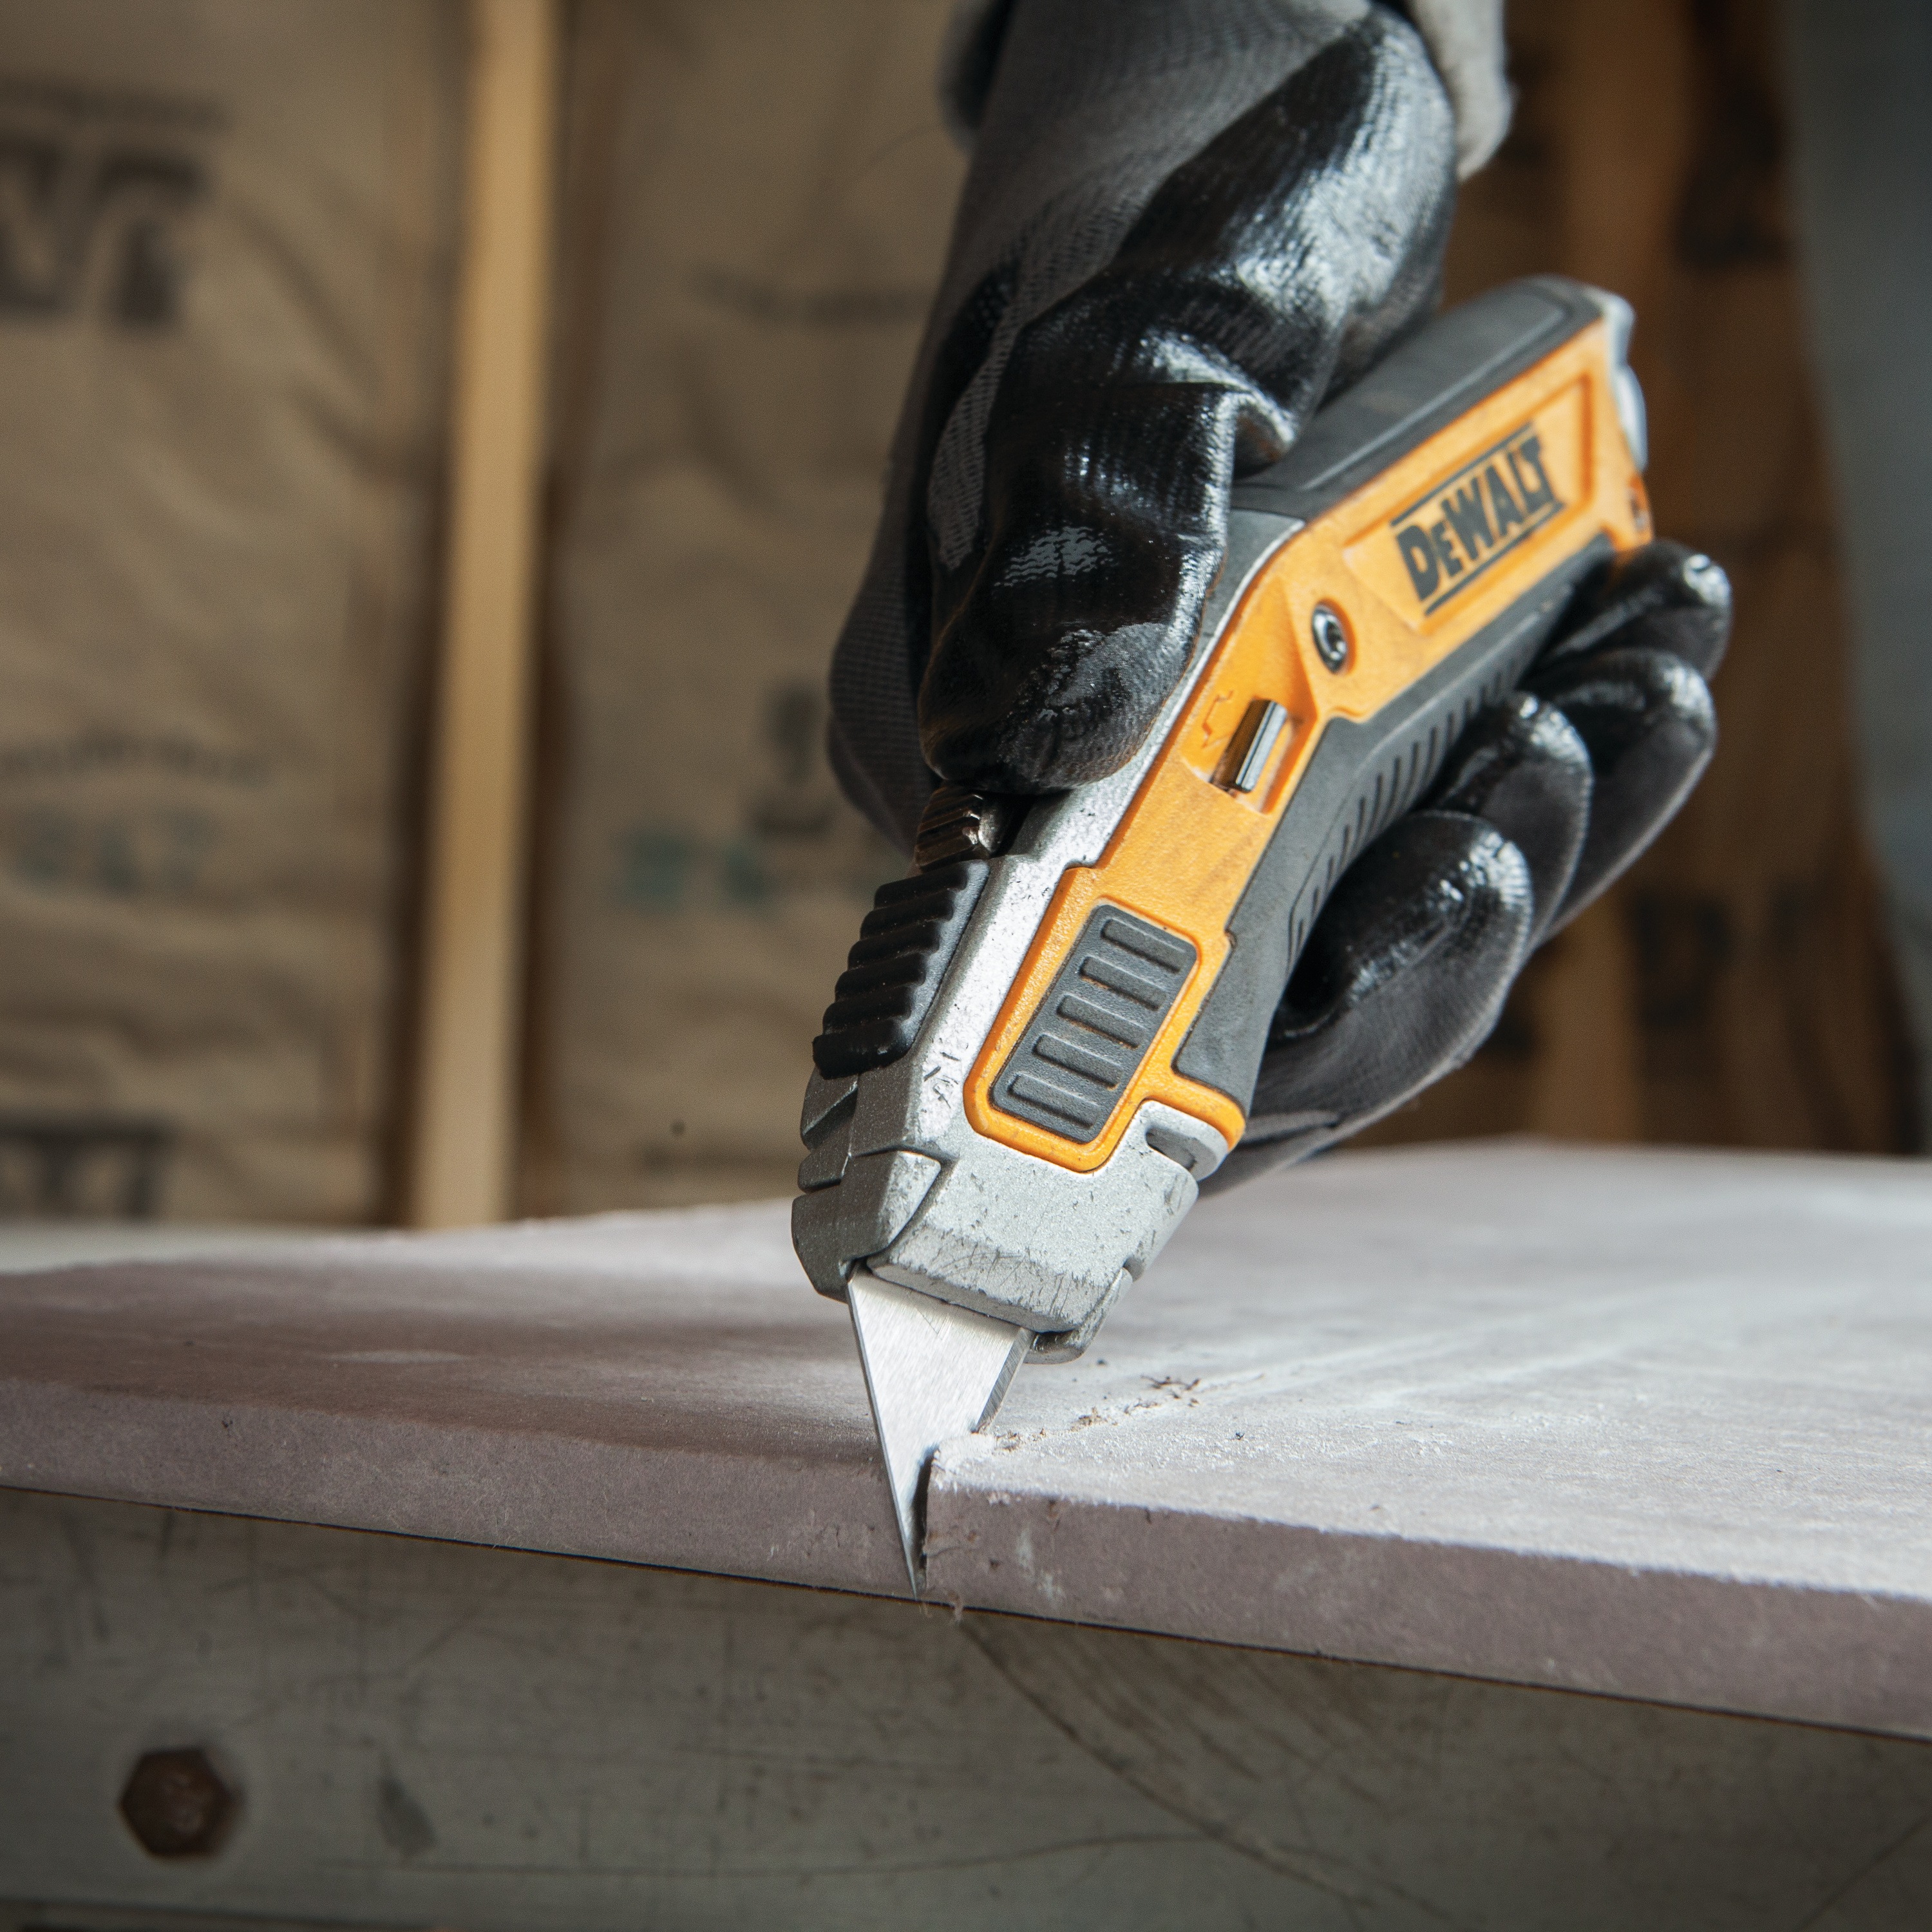 Close up of Premium retractable utility knife cutting hard concrete.